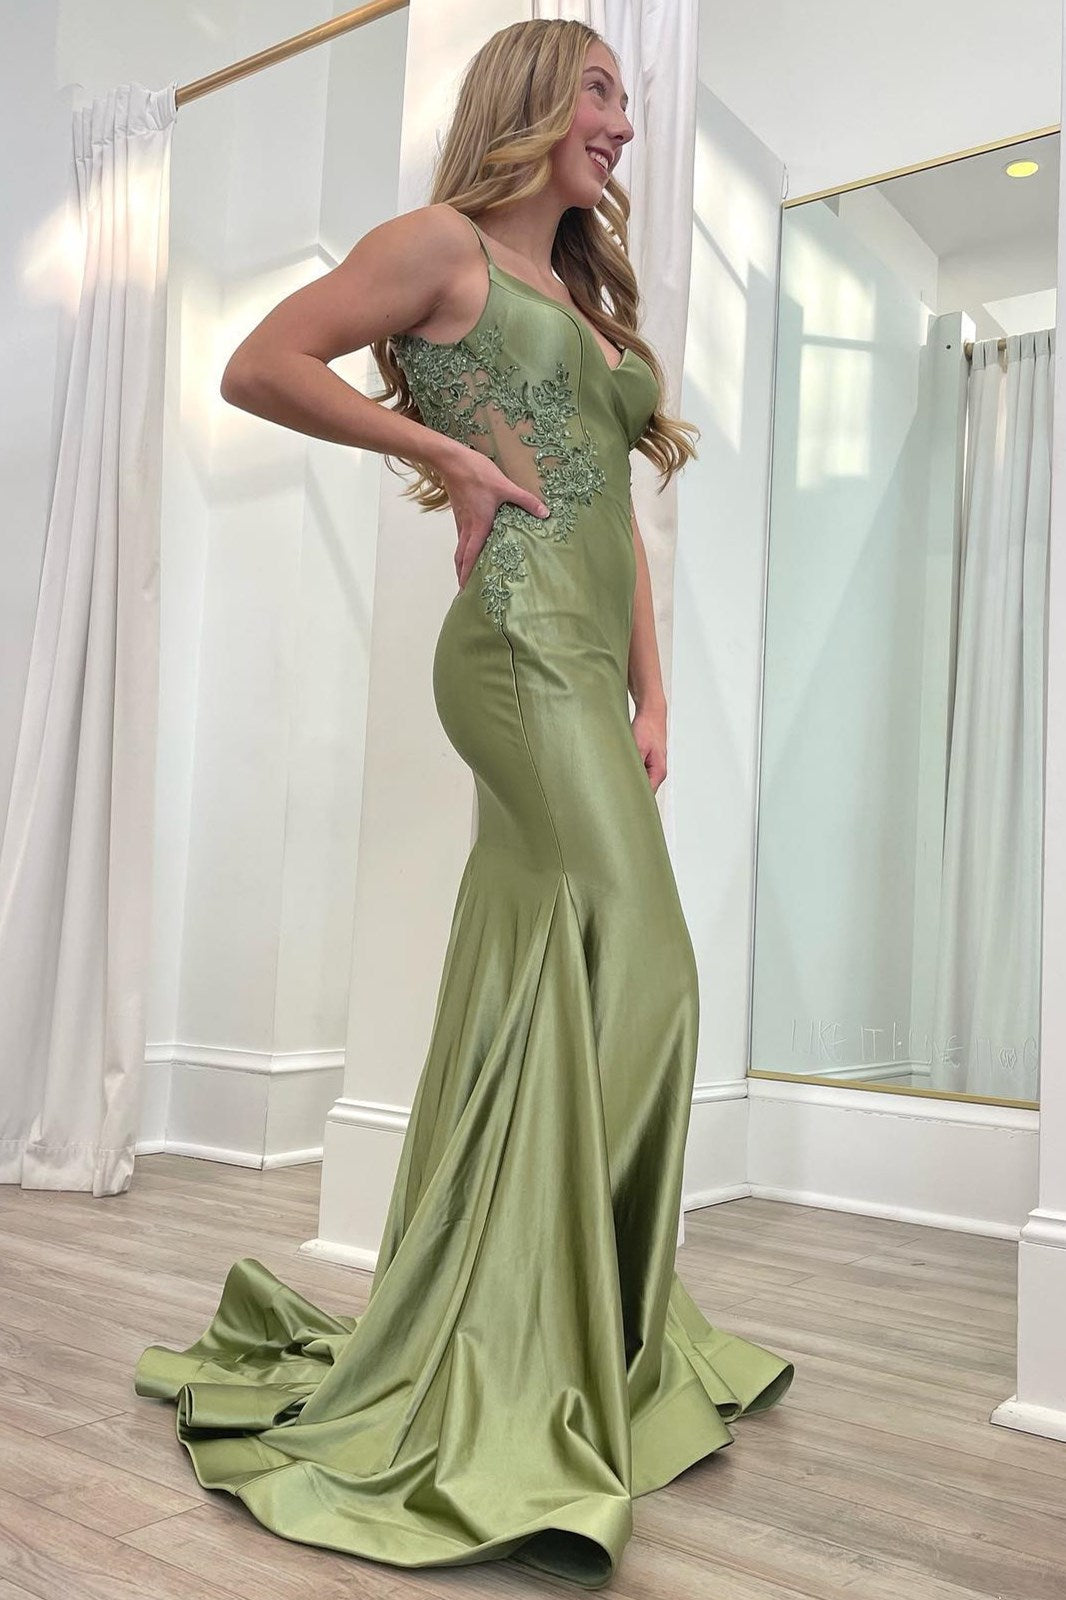 Sage Green Spaghetti Strap Backless Trumpet Long Gown